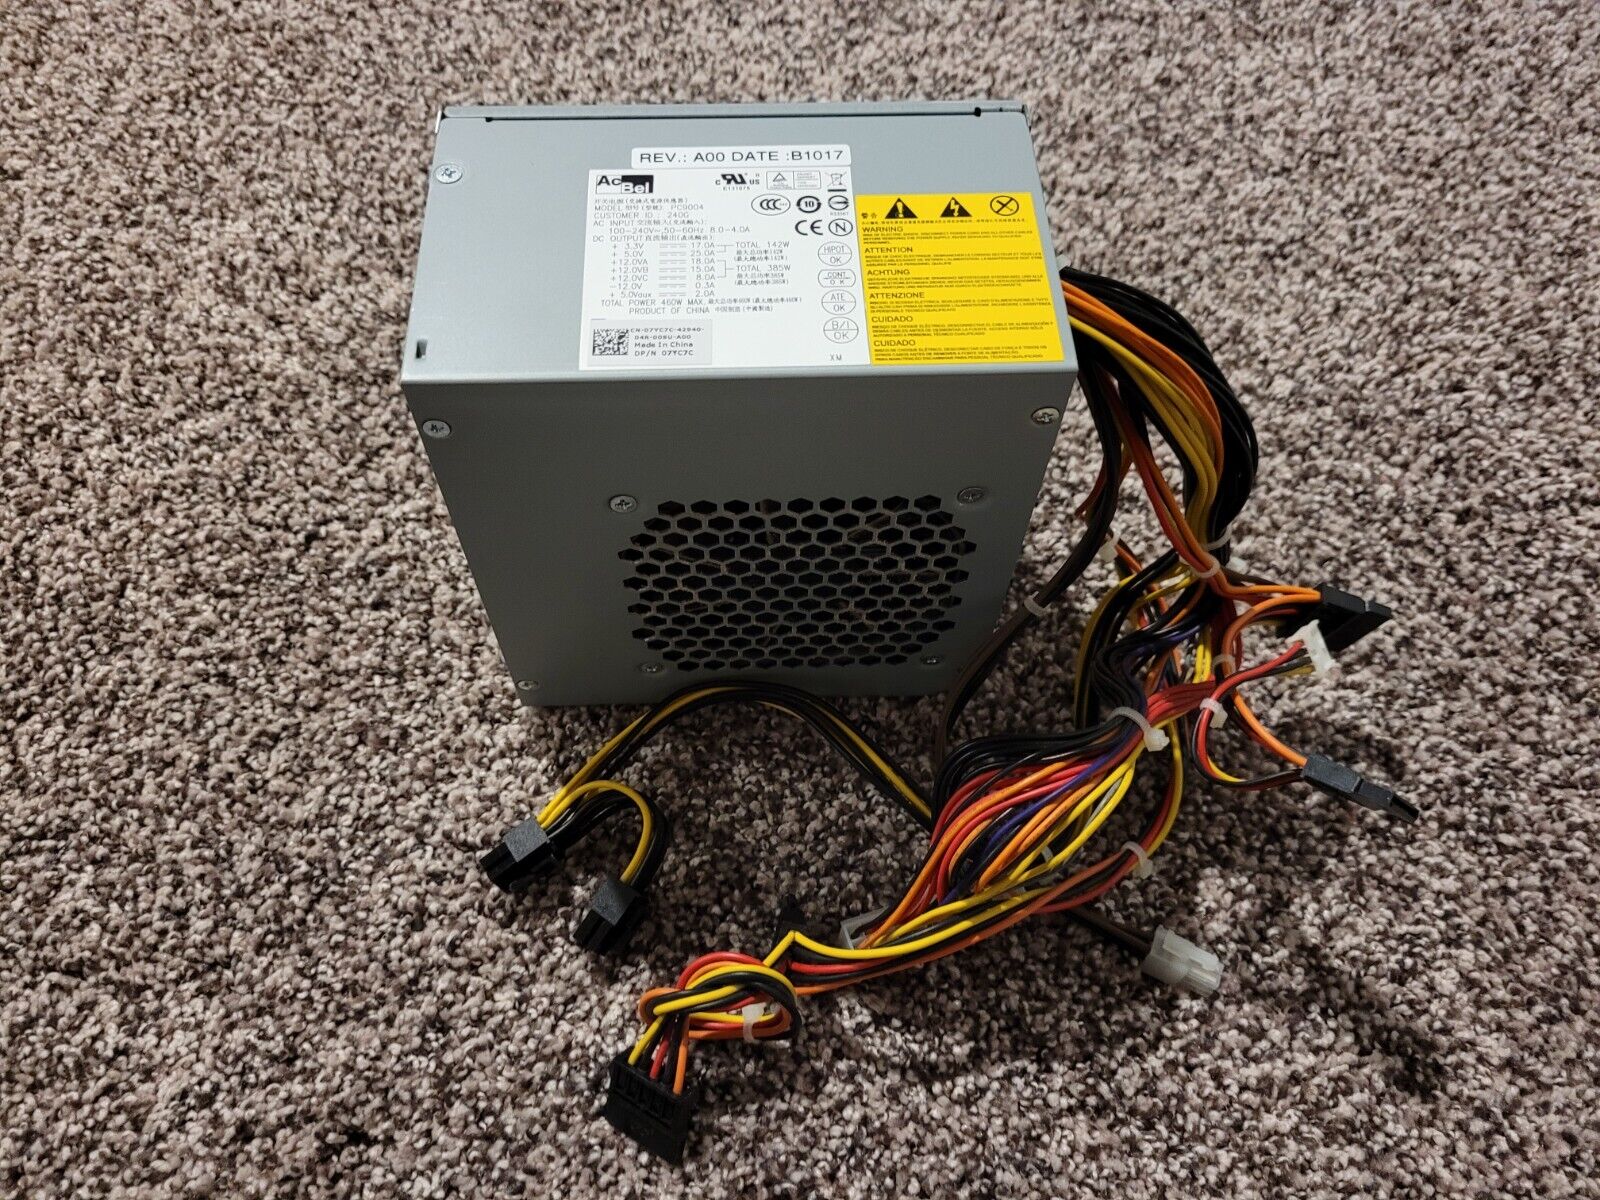 Vintage Dell Studio XPS 7100 Power Supply Model PC9004 - From Working Computer